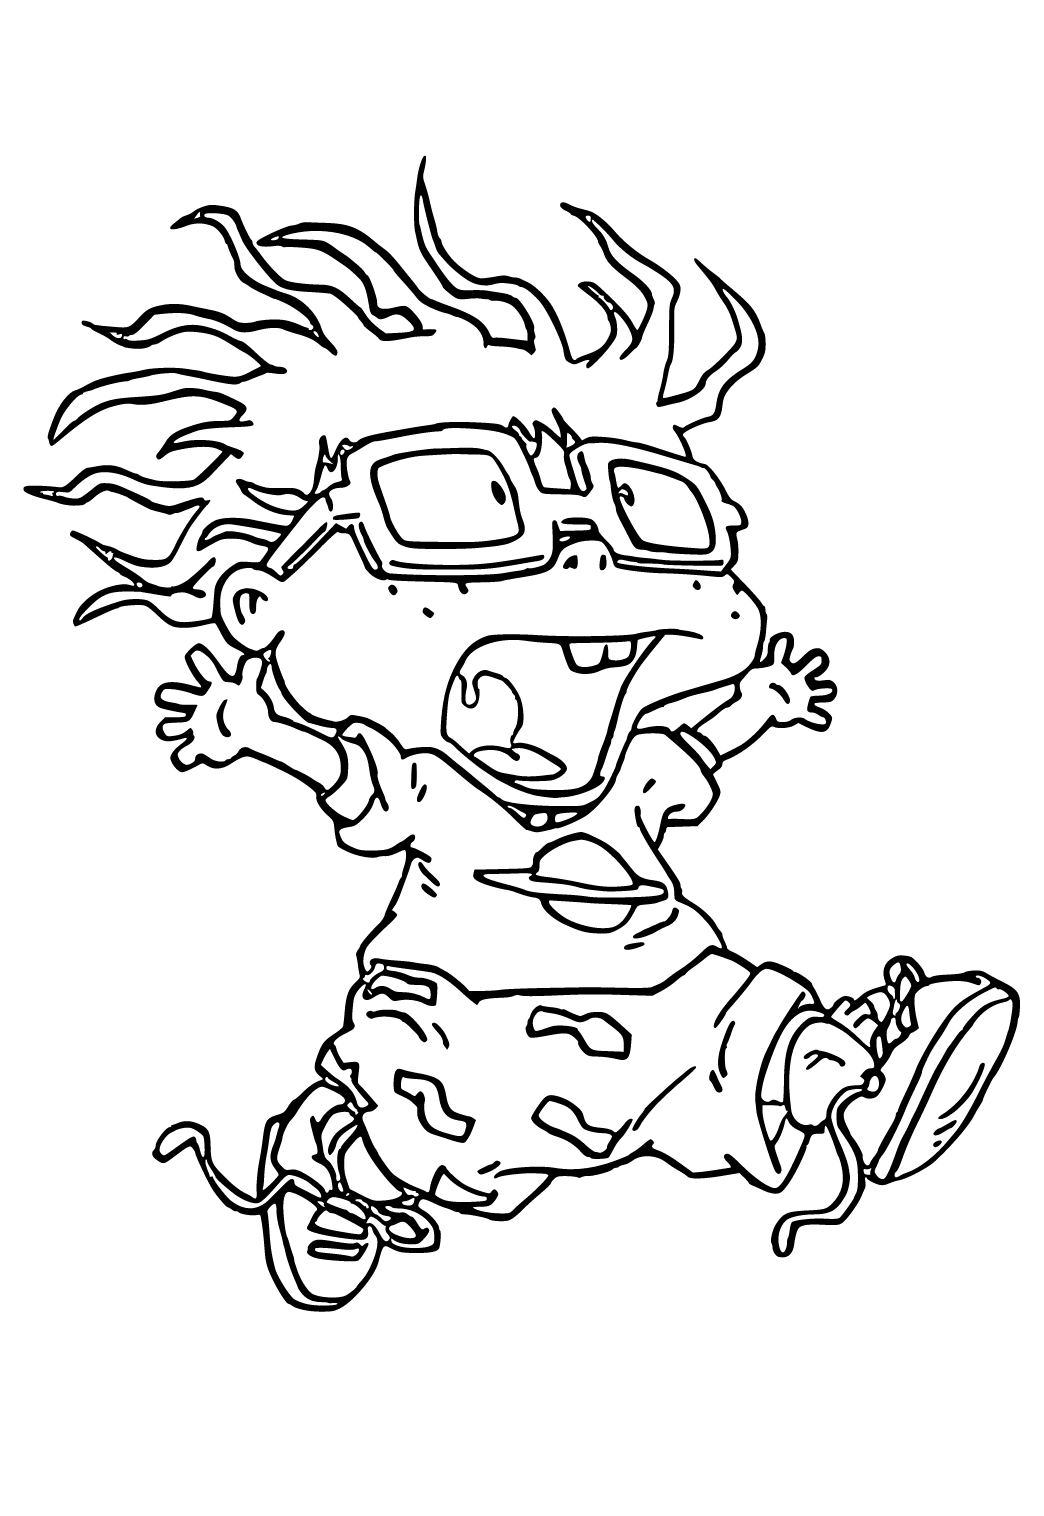 Free printable rugrats fright coloring page for adults and kids